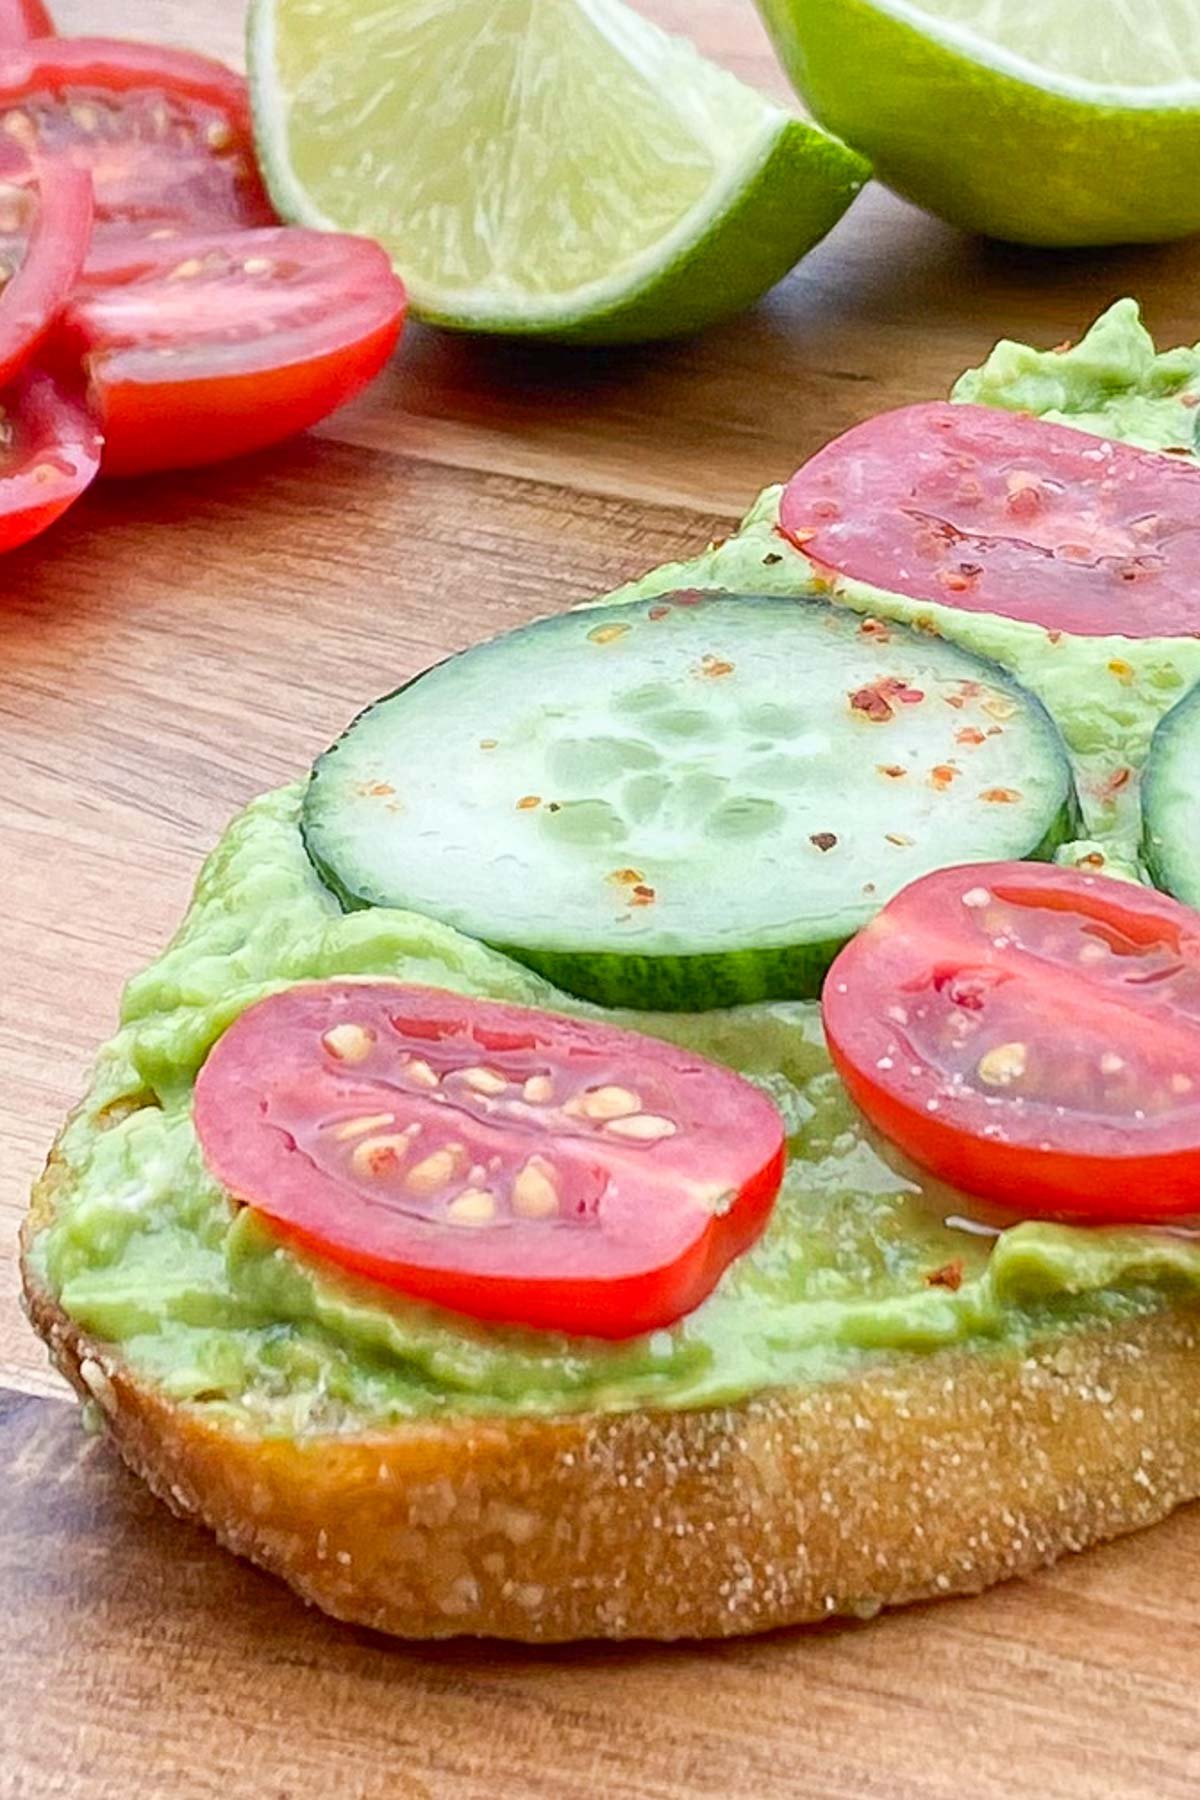 Crusty bun topped with mashed avocado, cherry tomato and cucumber slices.